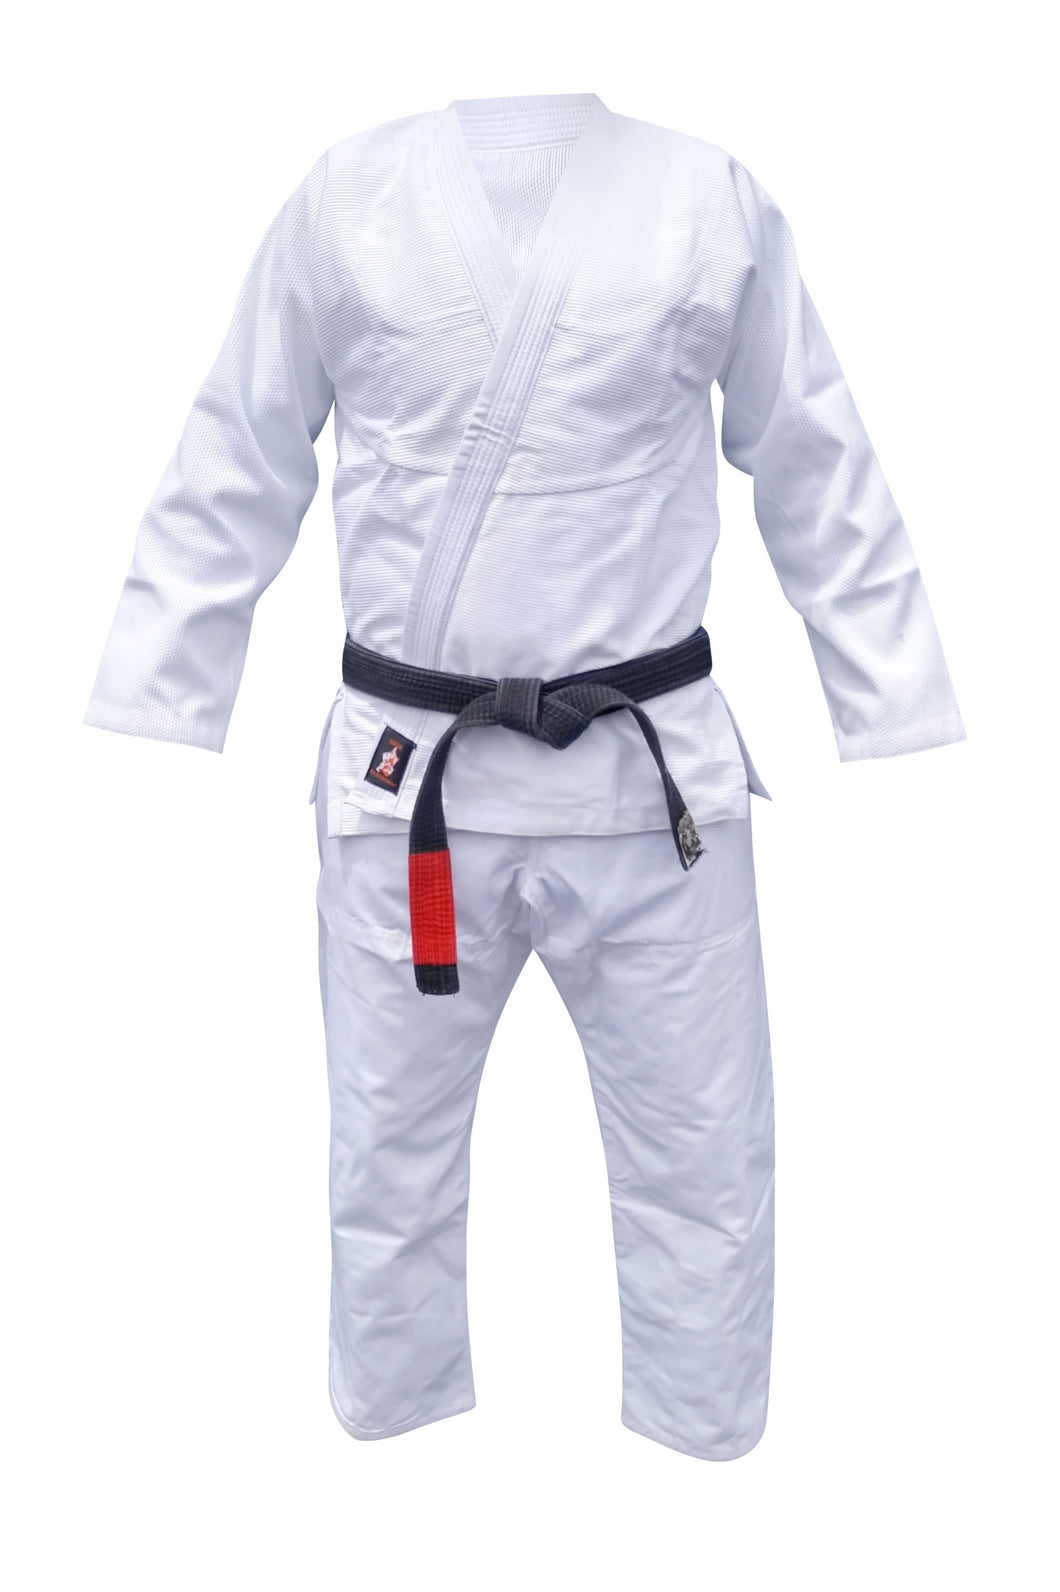 White Blank Gi With Minor defect